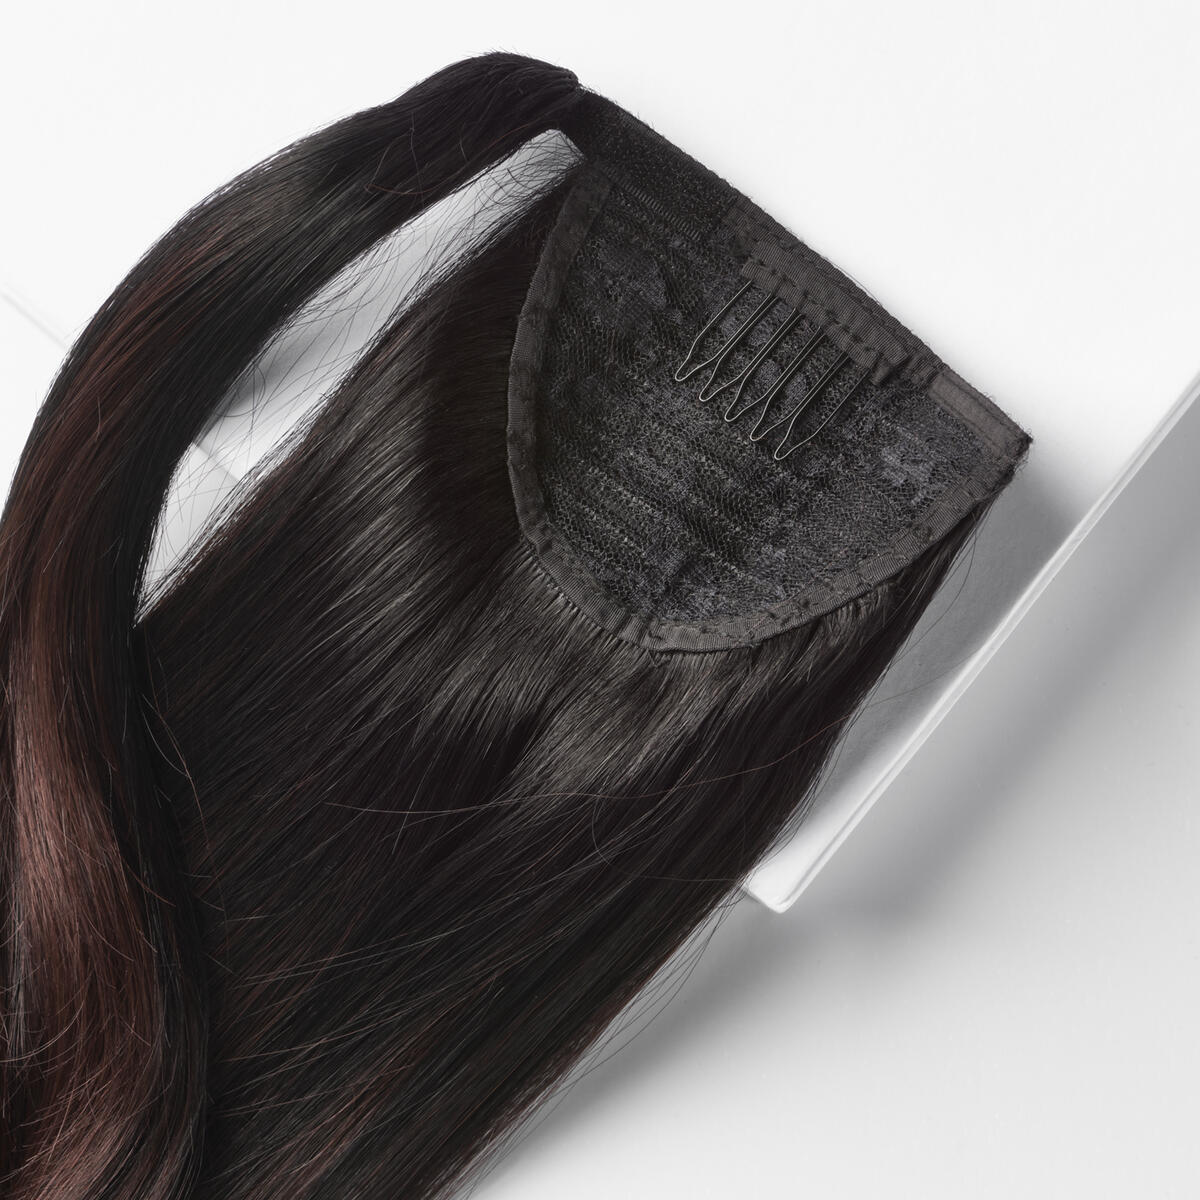 Clip-in Ponytail Ponytail made of real hair B1.0/6.12 Cherry Infused Black Balayage 50 cm